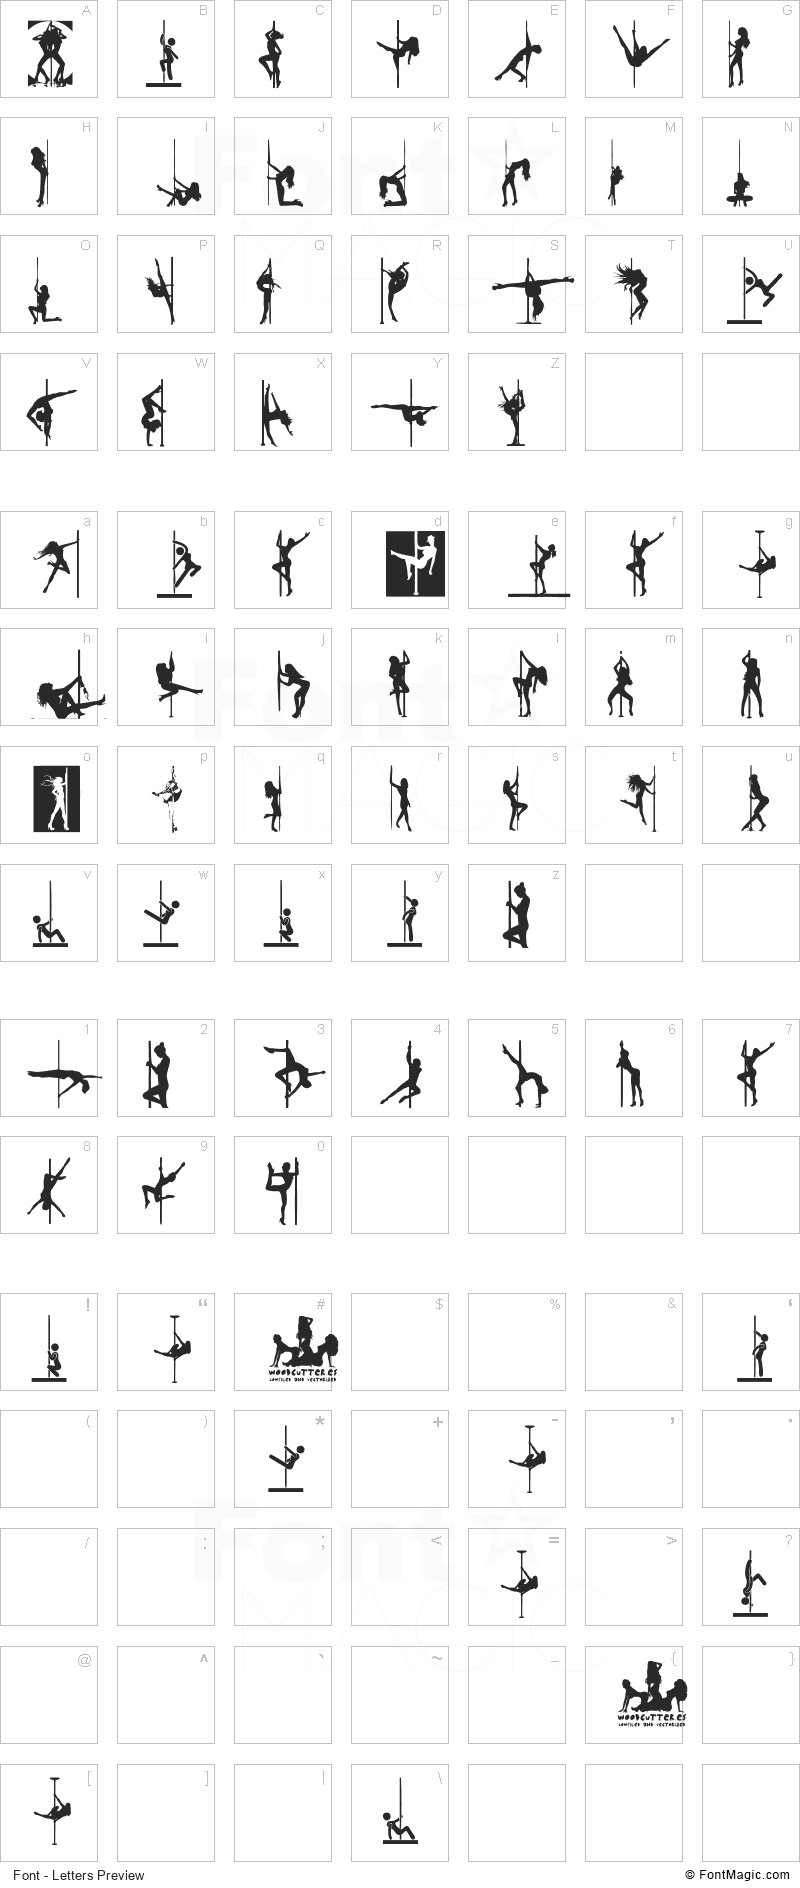 Pole Dance Font - All Latters Preview Chart